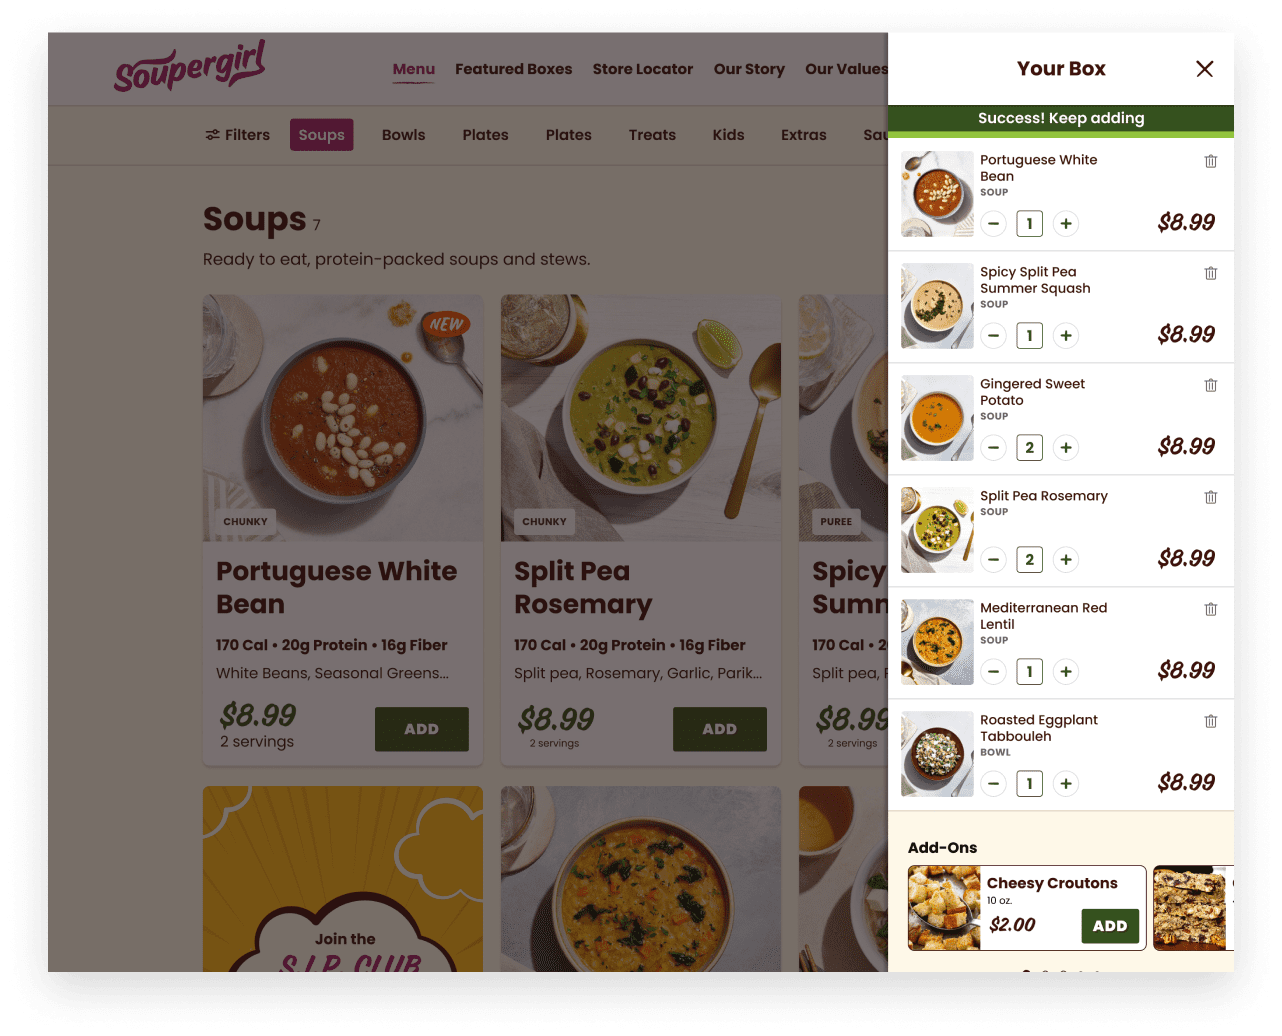 Soupergirl customers can easily manage what is in their box without leaving the product listing page.